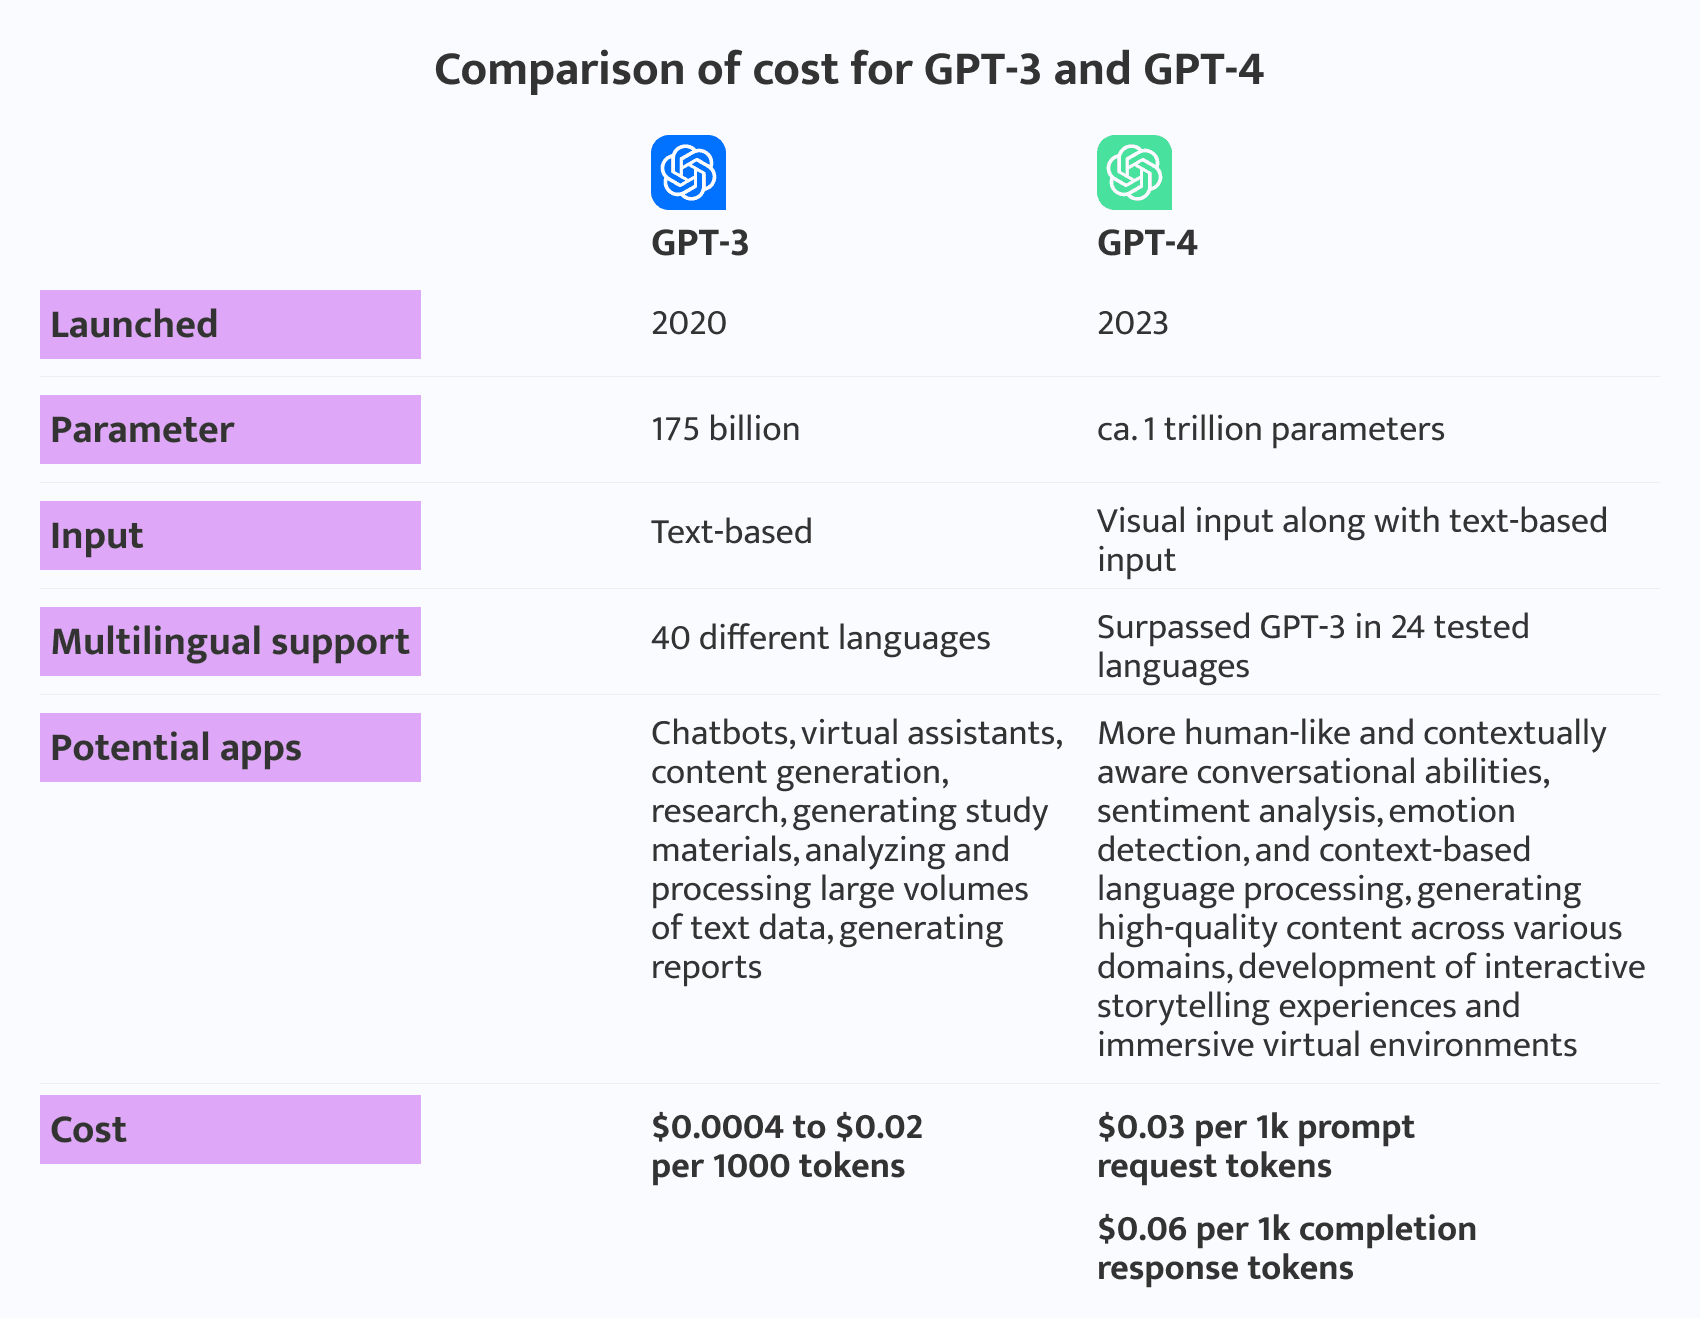 difference between GPT-3 and GPT-4